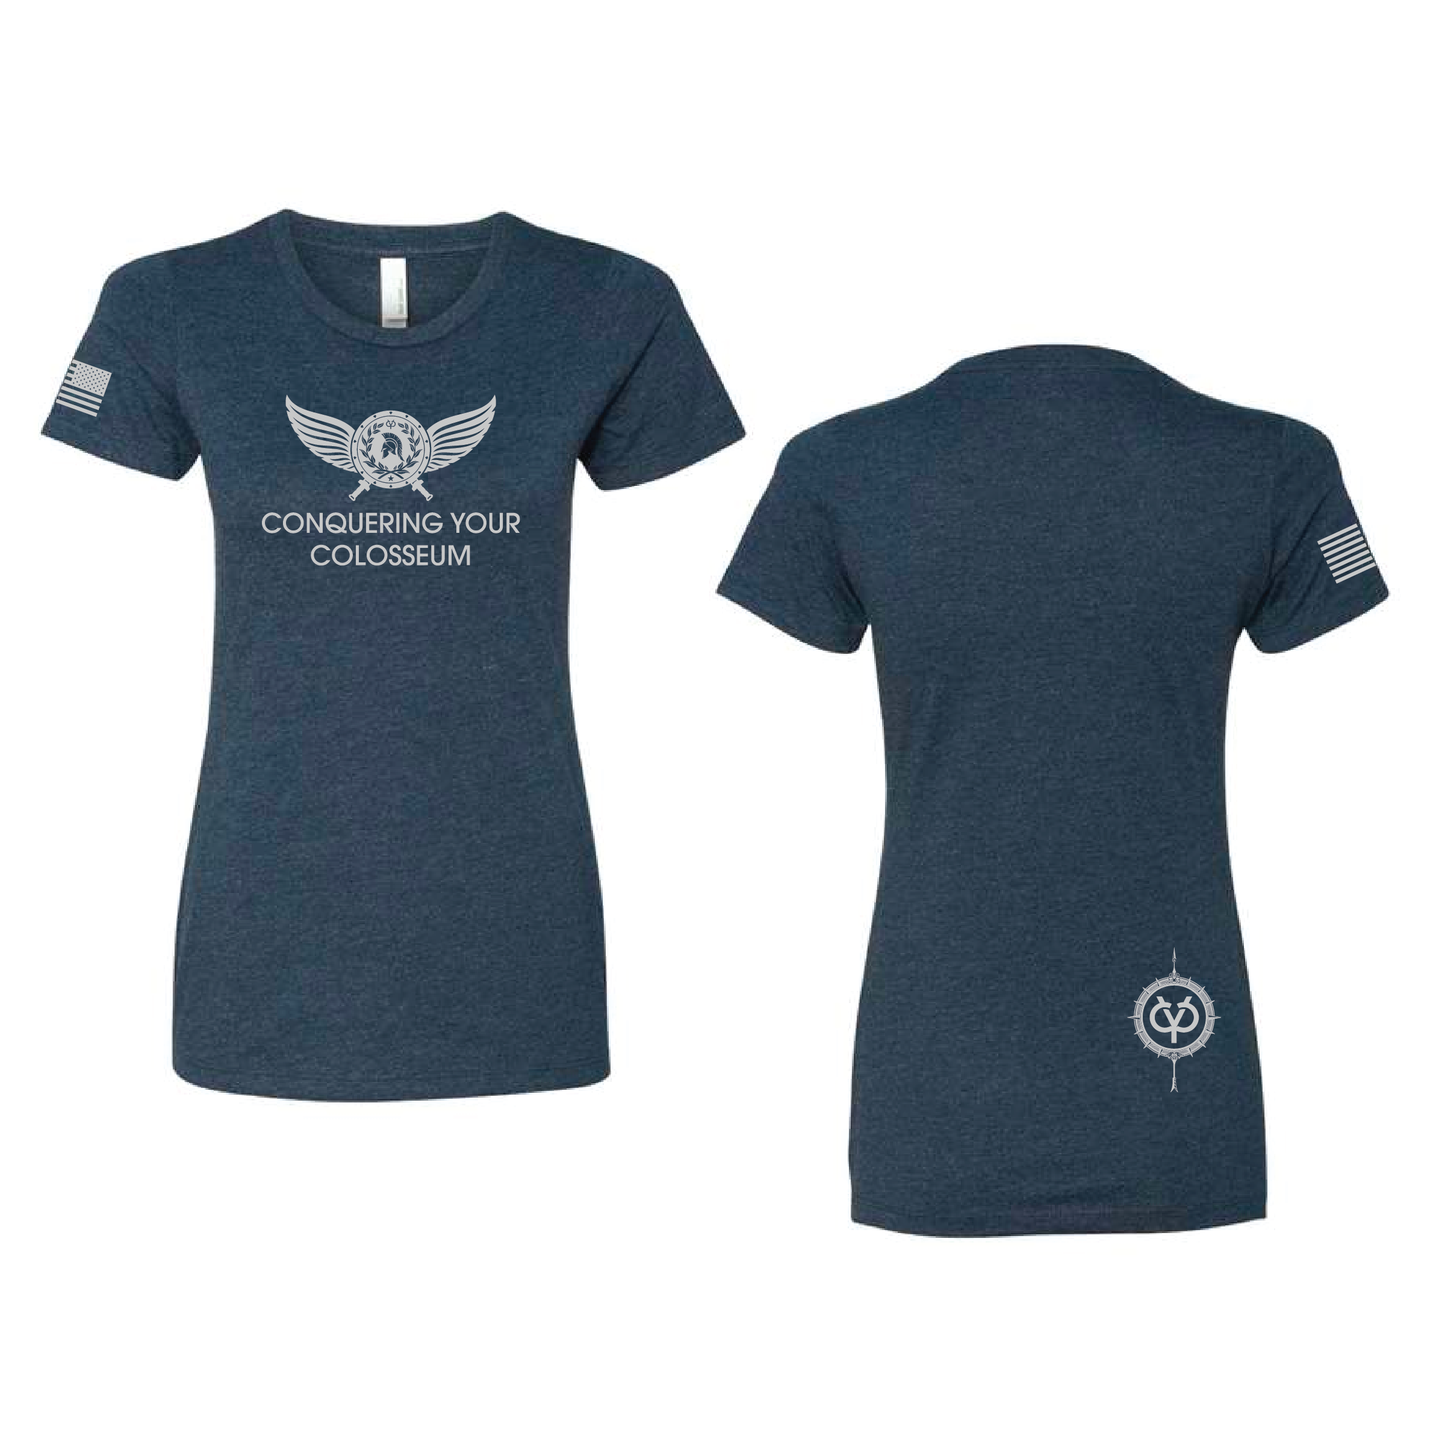 Conquering Your Colosseum - Women's Tee